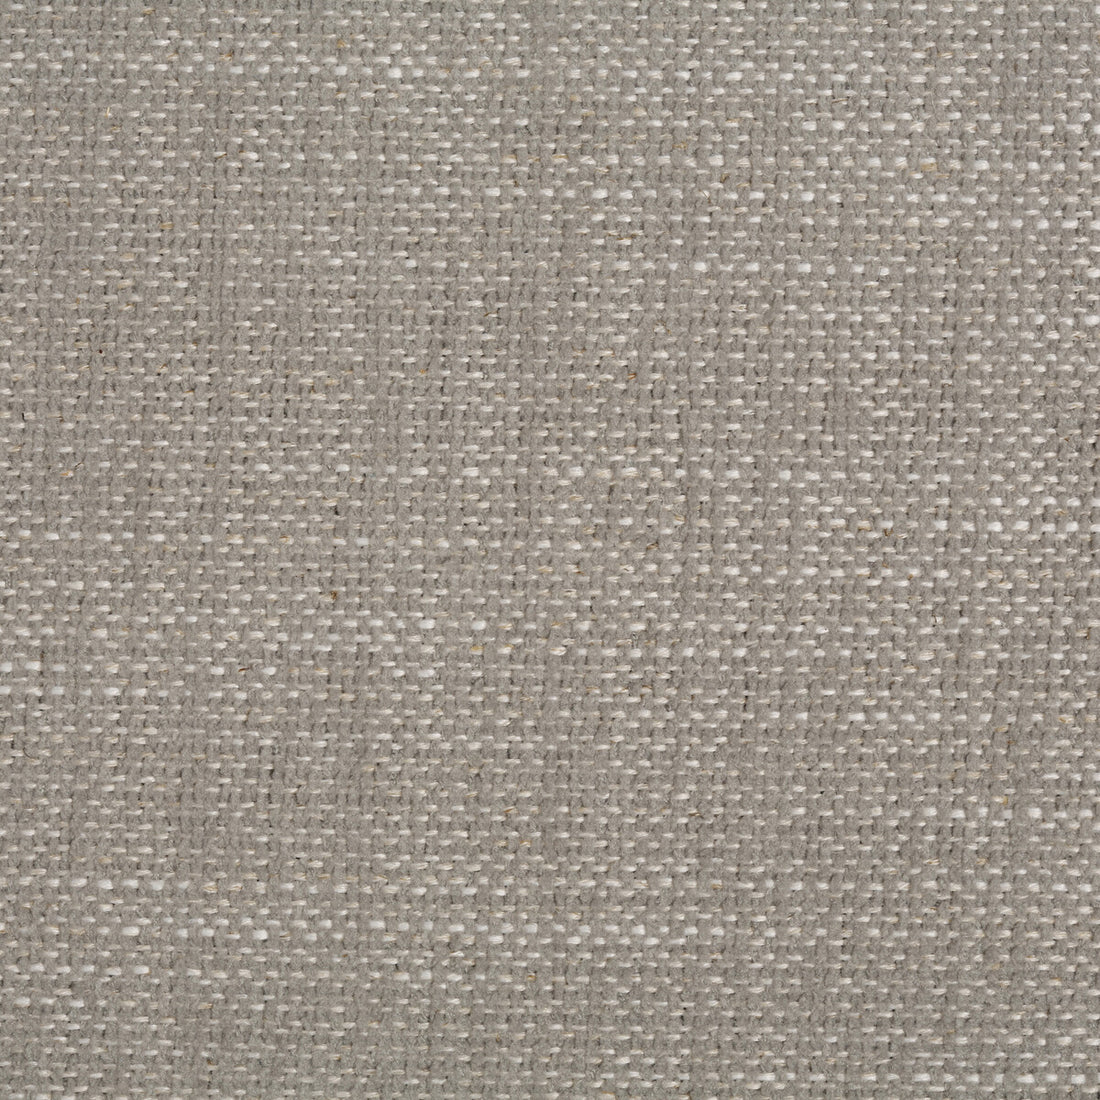 Kravet Contract fabric in 35112-11 color - pattern 35112.11.0 - by Kravet Contract in the Crypton Incase collection